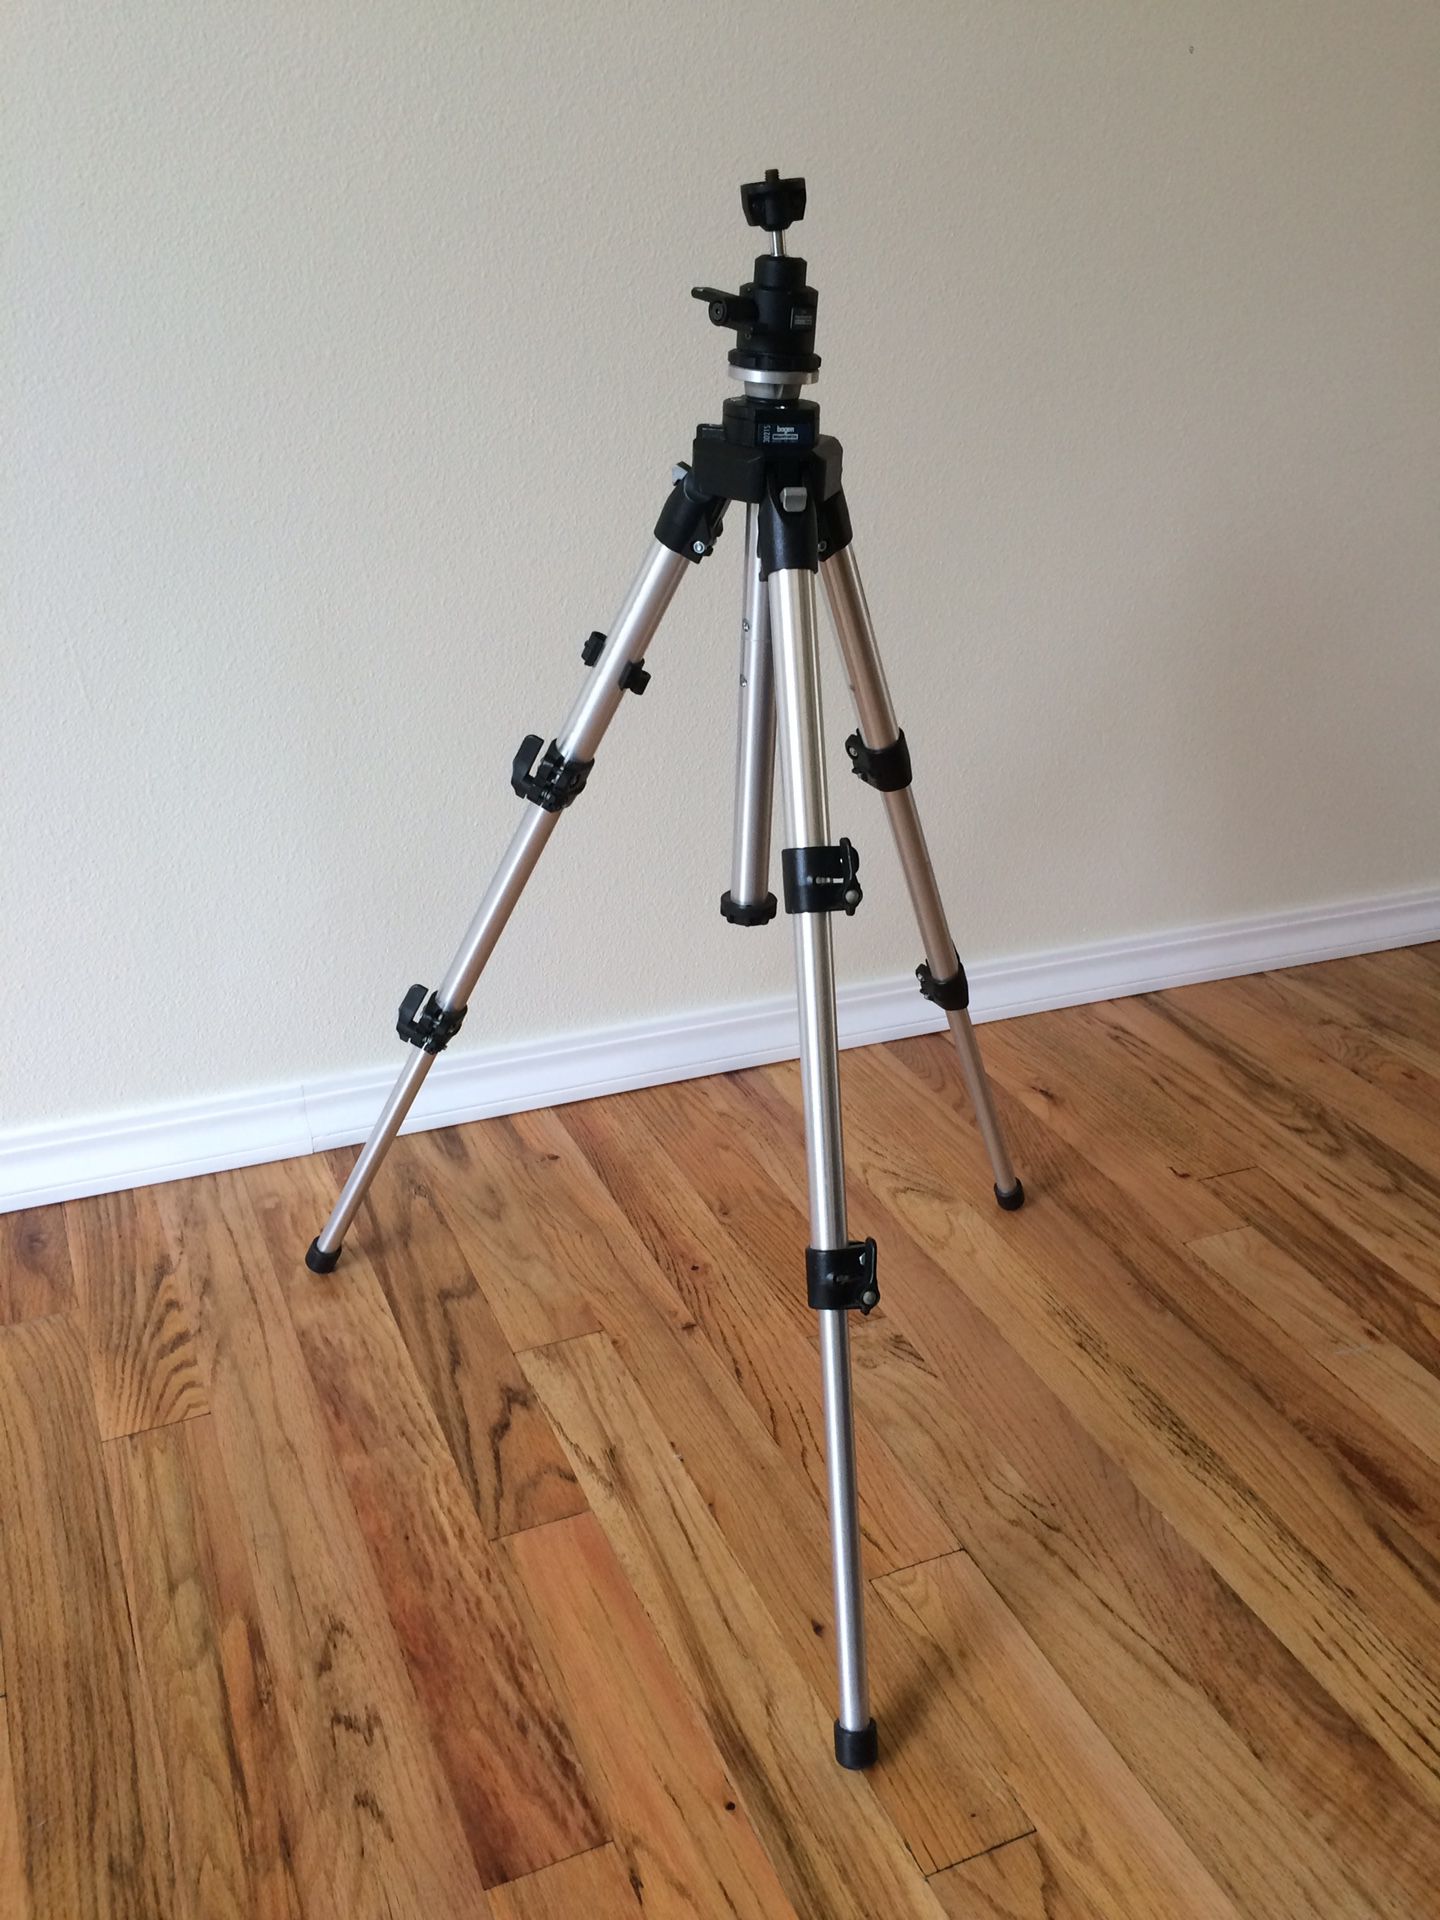 Bogen ManFrotto Tripod - Made in Italy